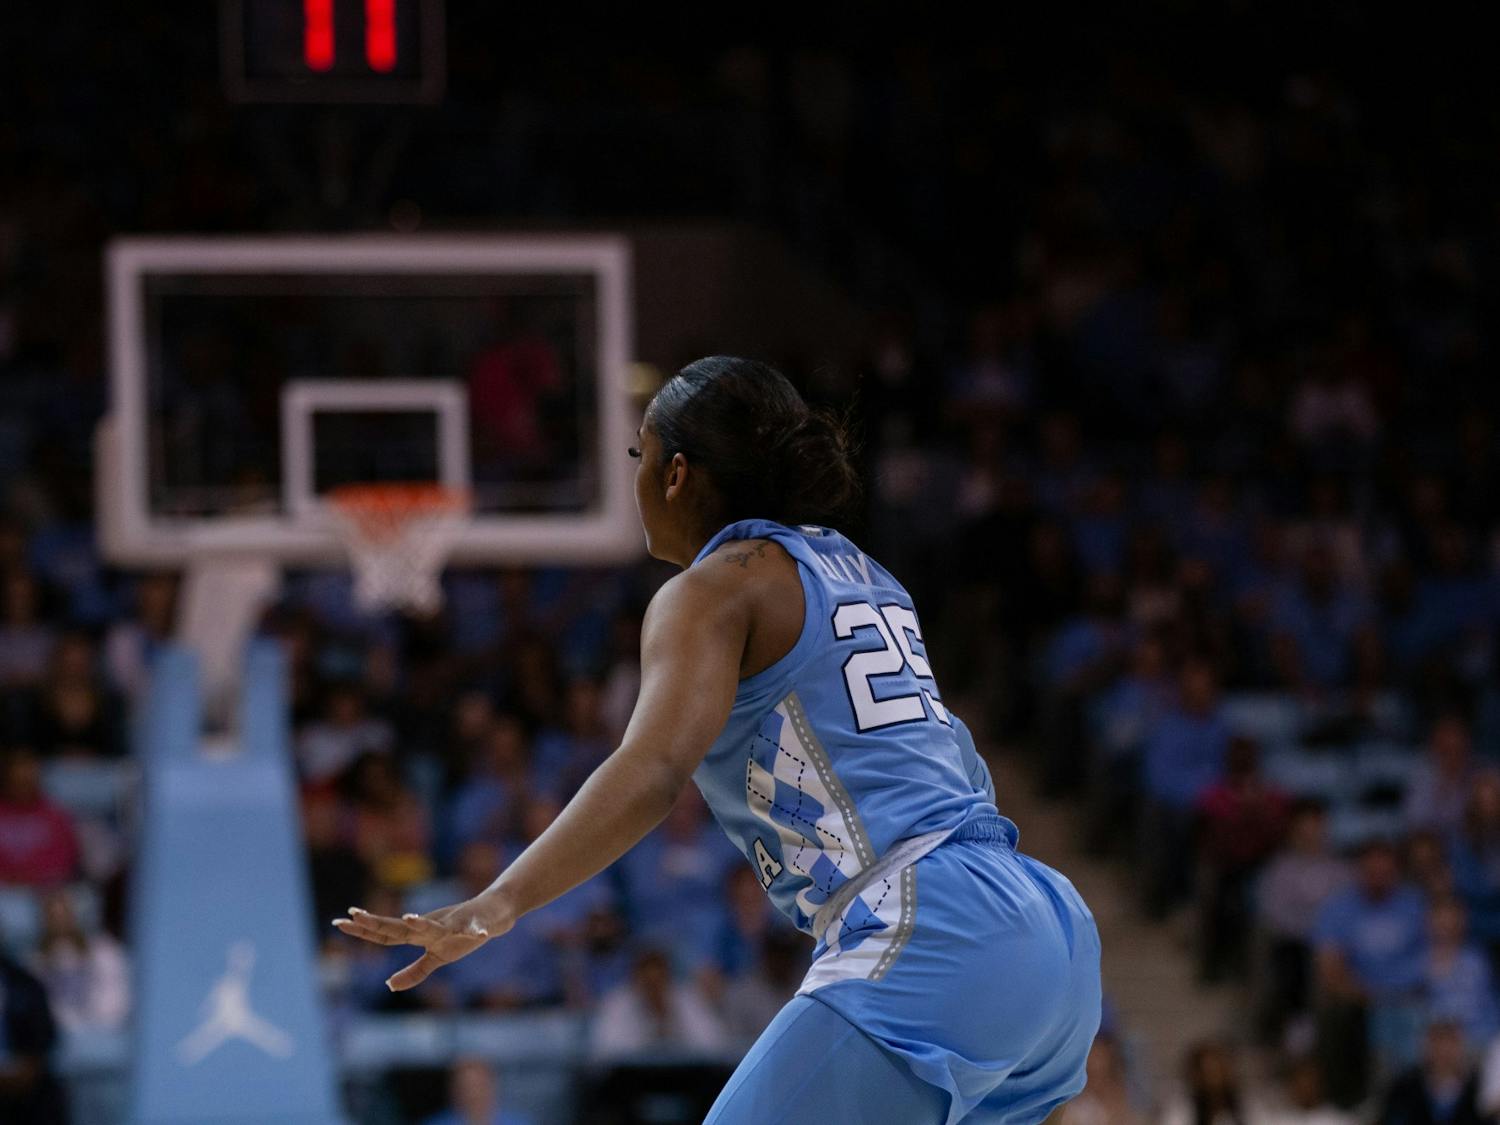 UNC junior guard Deja Kelly (25) defending during the women's basketball game against the NC State Wolfpack in Carmichael Arena on Sunday, Jan. 15, 2023. The Tar Heels won 56-47.